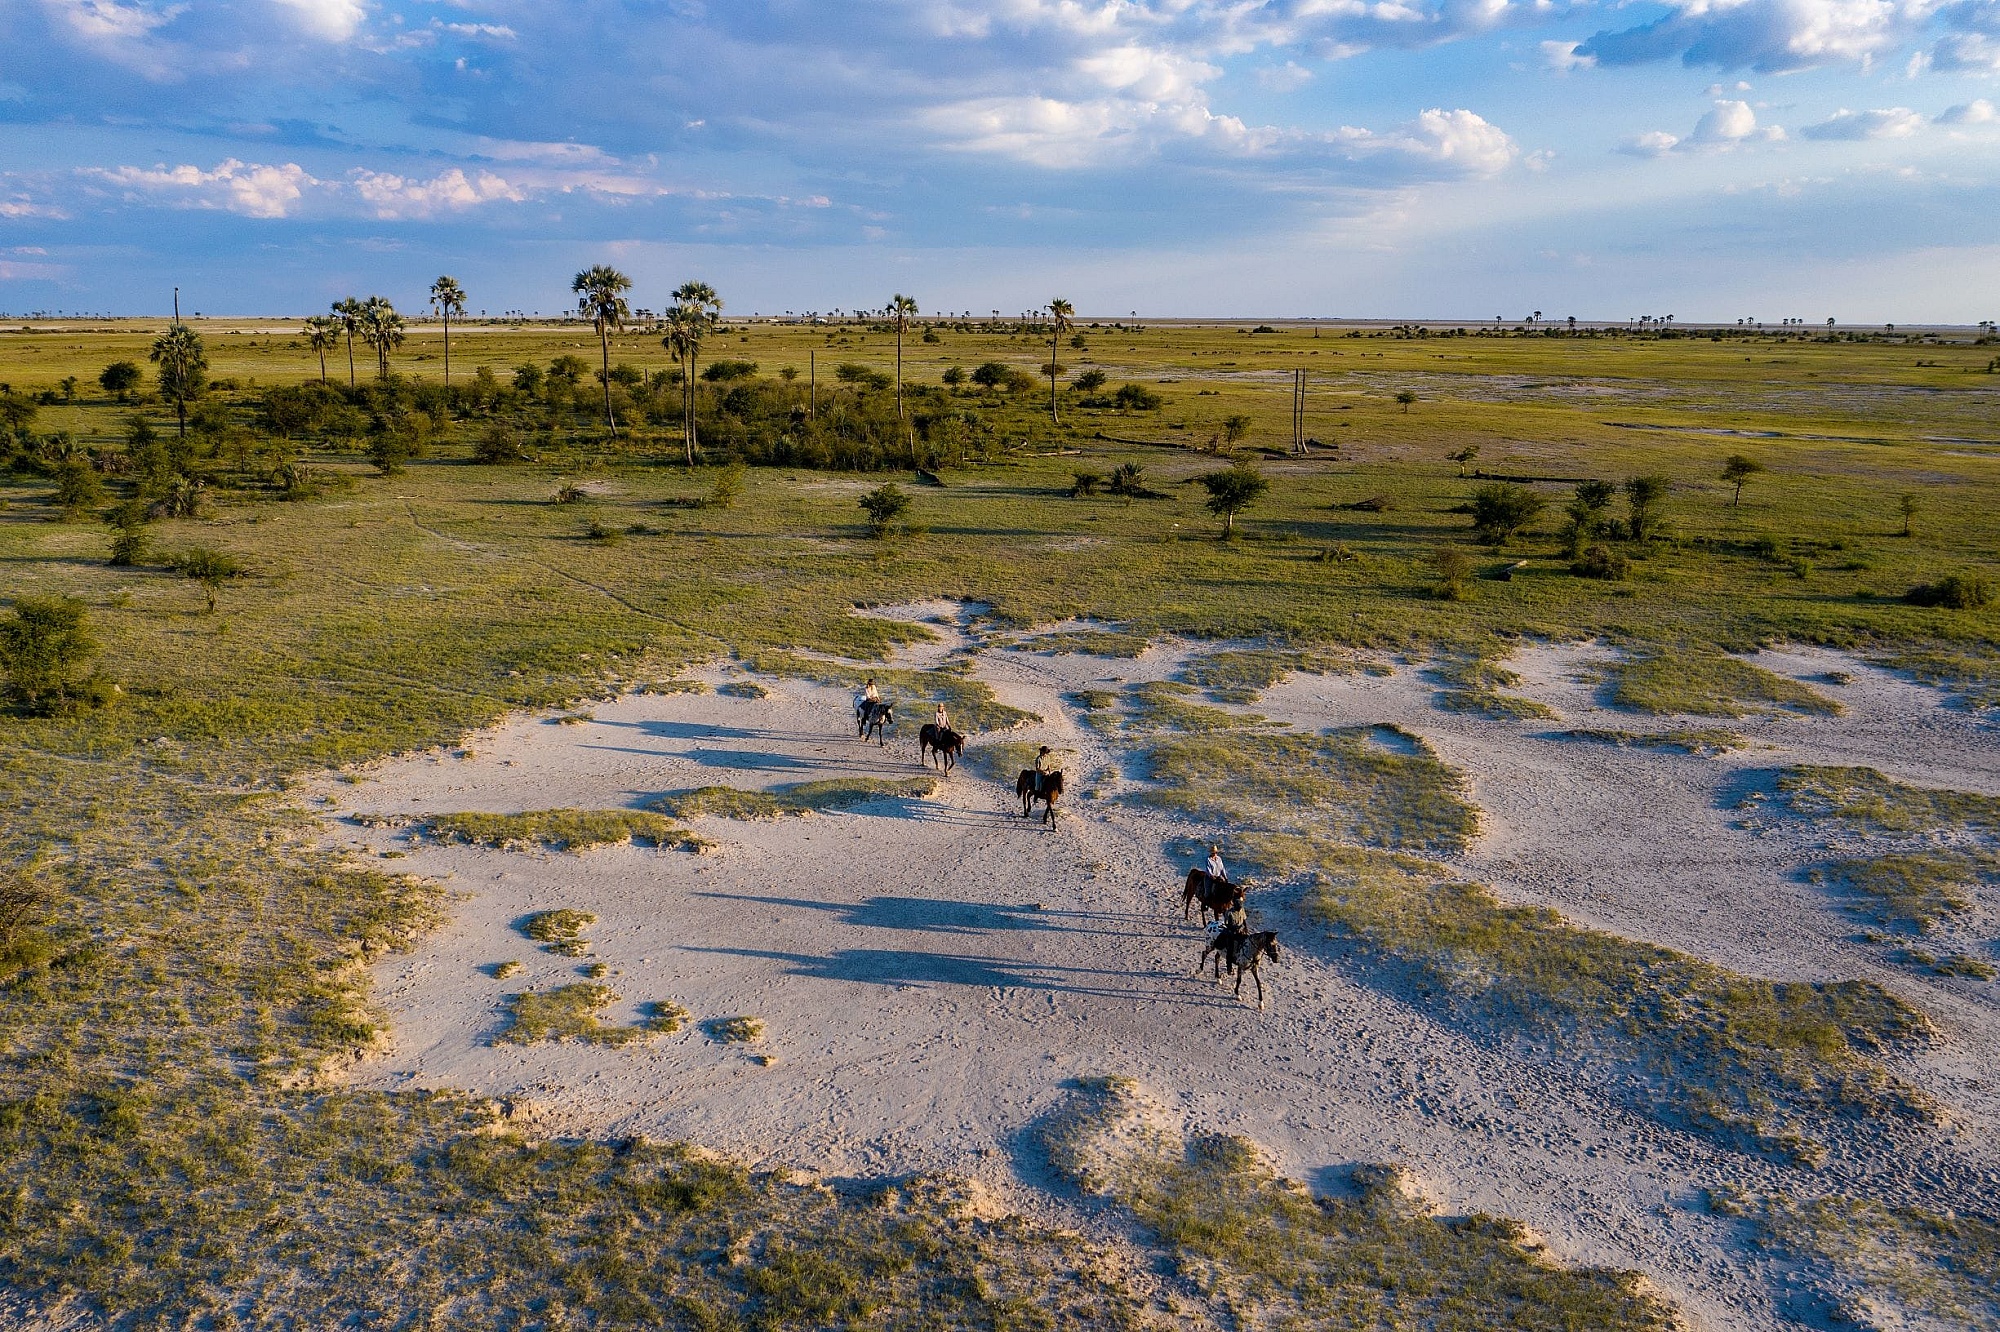 Aerial view of a group of horses with riders traversing a vast open landscape dotted with small patches of greenery and scattered palm trees under a blue sky with soft clouds.